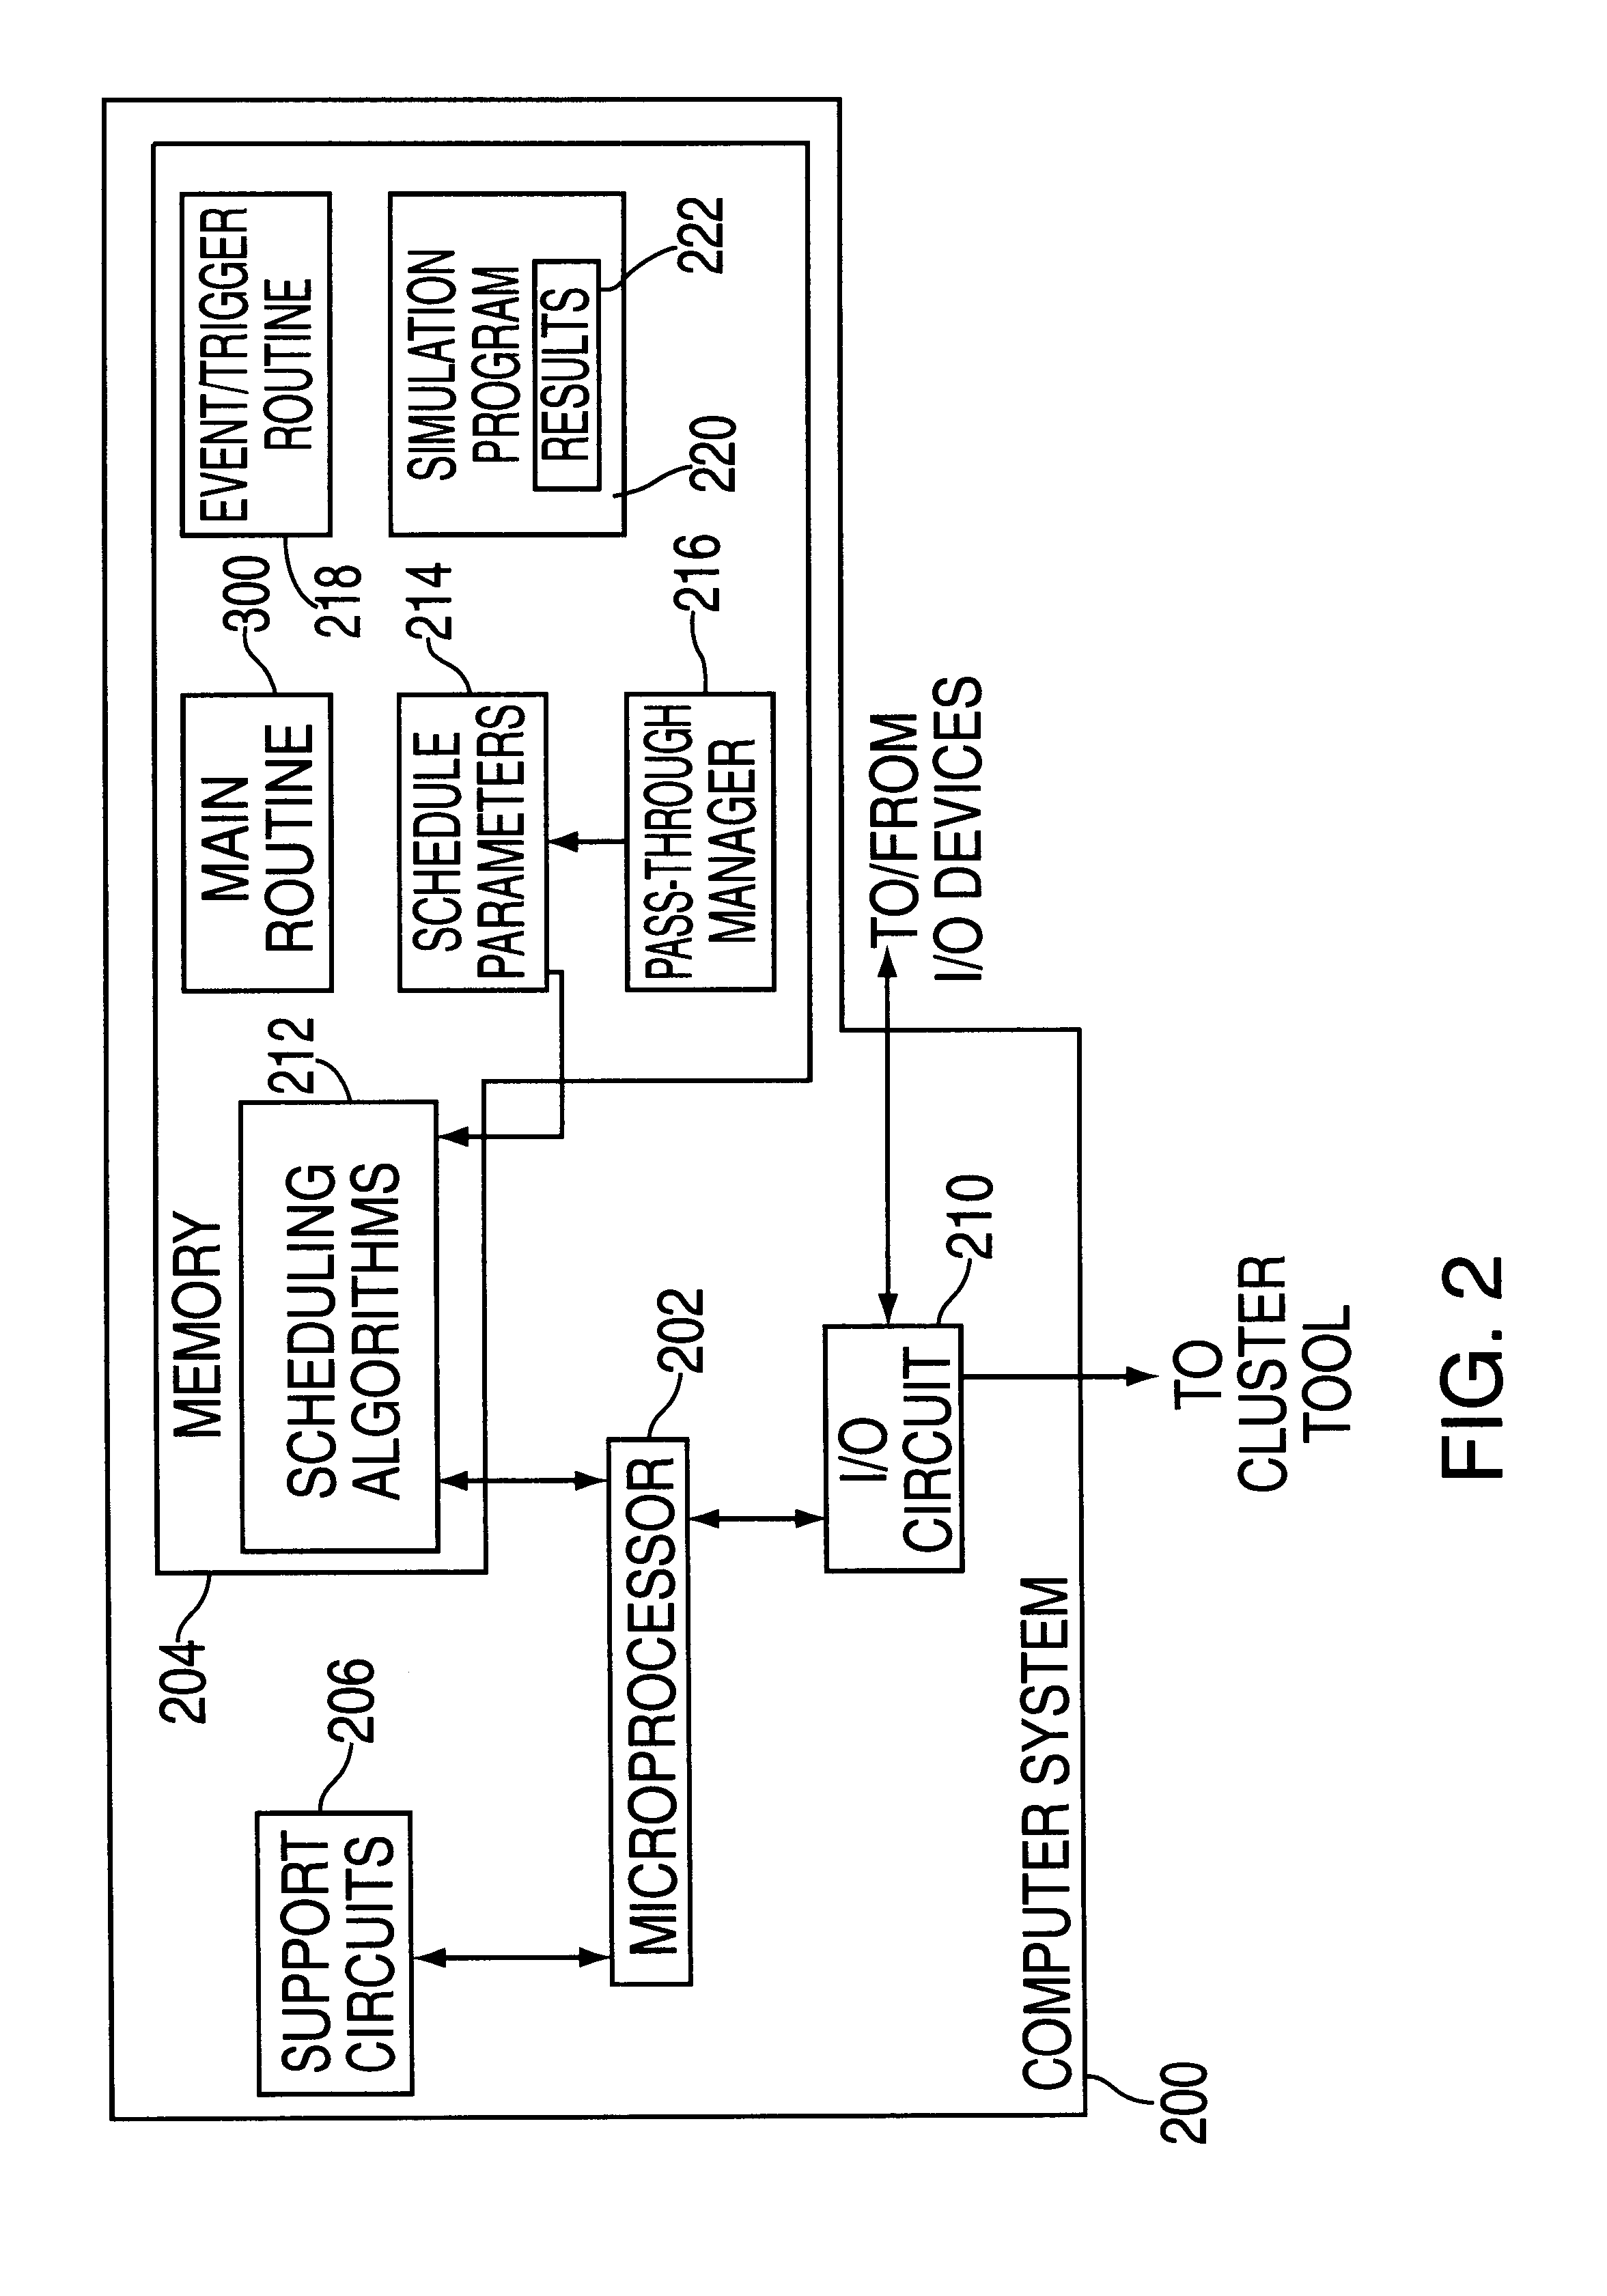 Method and apparatus for managing scheduling in a multiple cluster tool